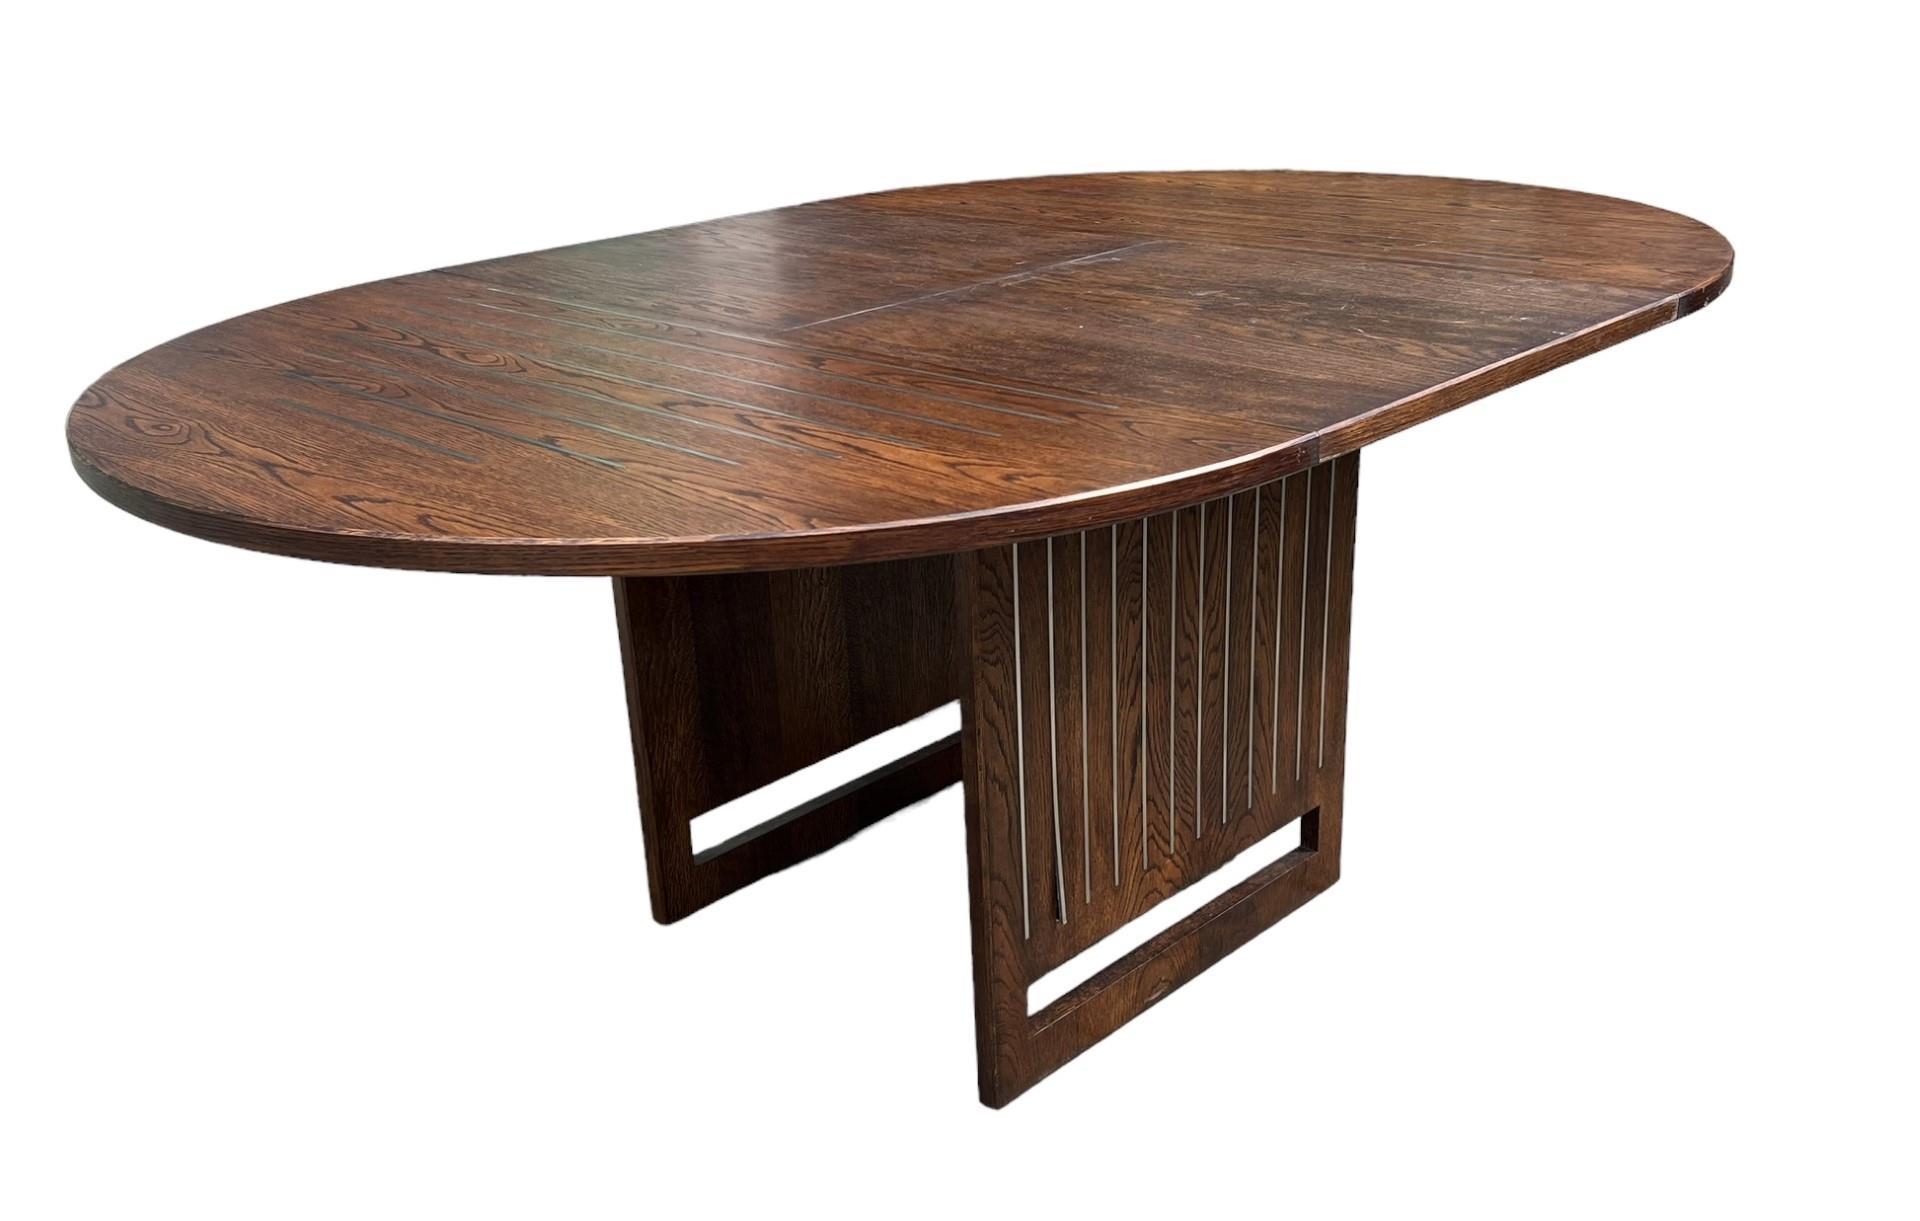 A CONTEMPORARY OAK AND STEEL INLAY DRAW LEAF DINING TABLE With single leaf, together with a matching - Image 4 of 7